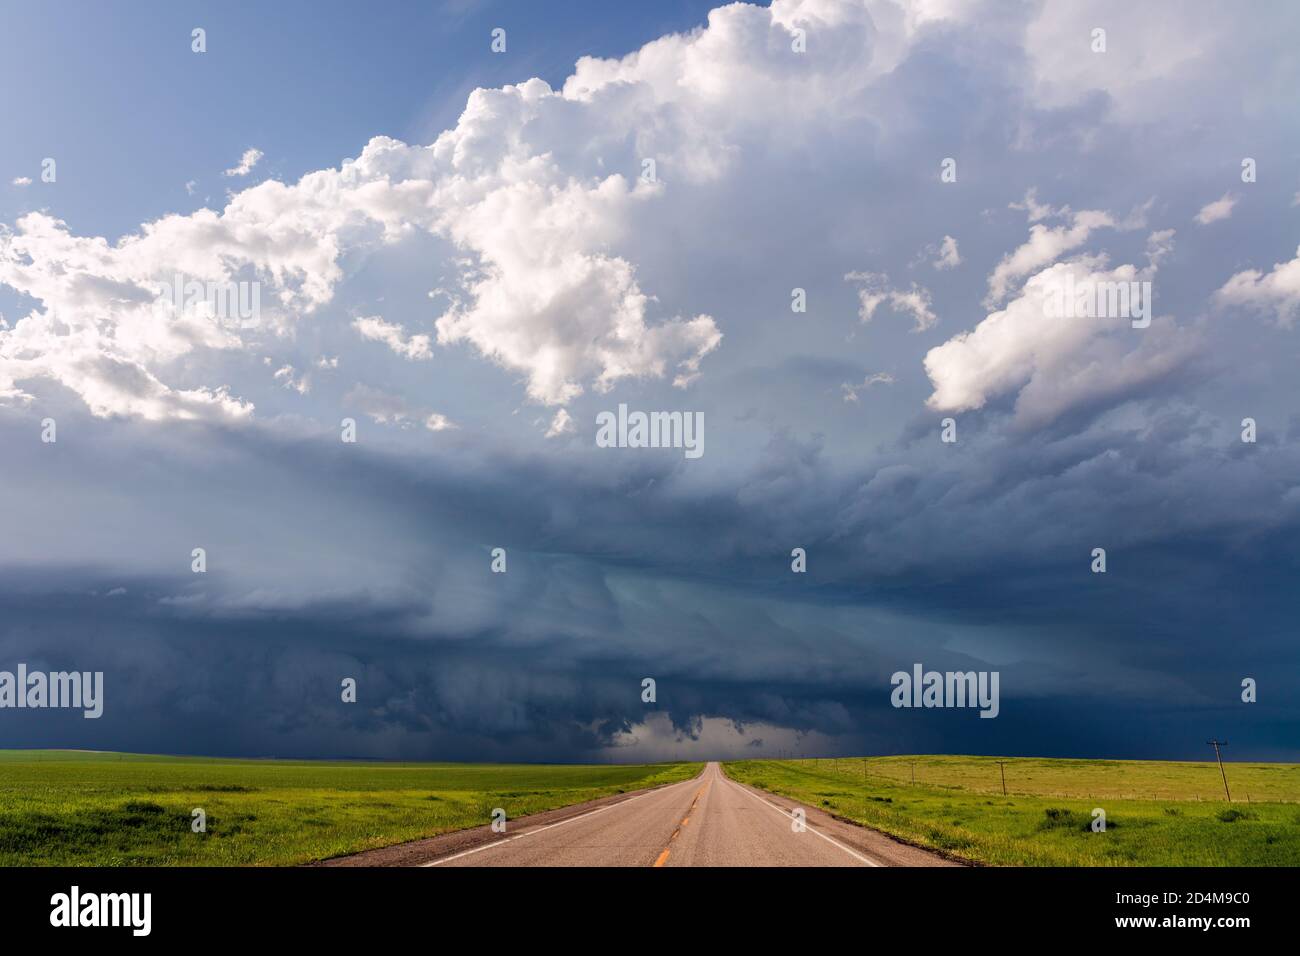 Scenic South Dakota landscape with a road and dark storm clouds approaching over the plains near Philip Stock Photo